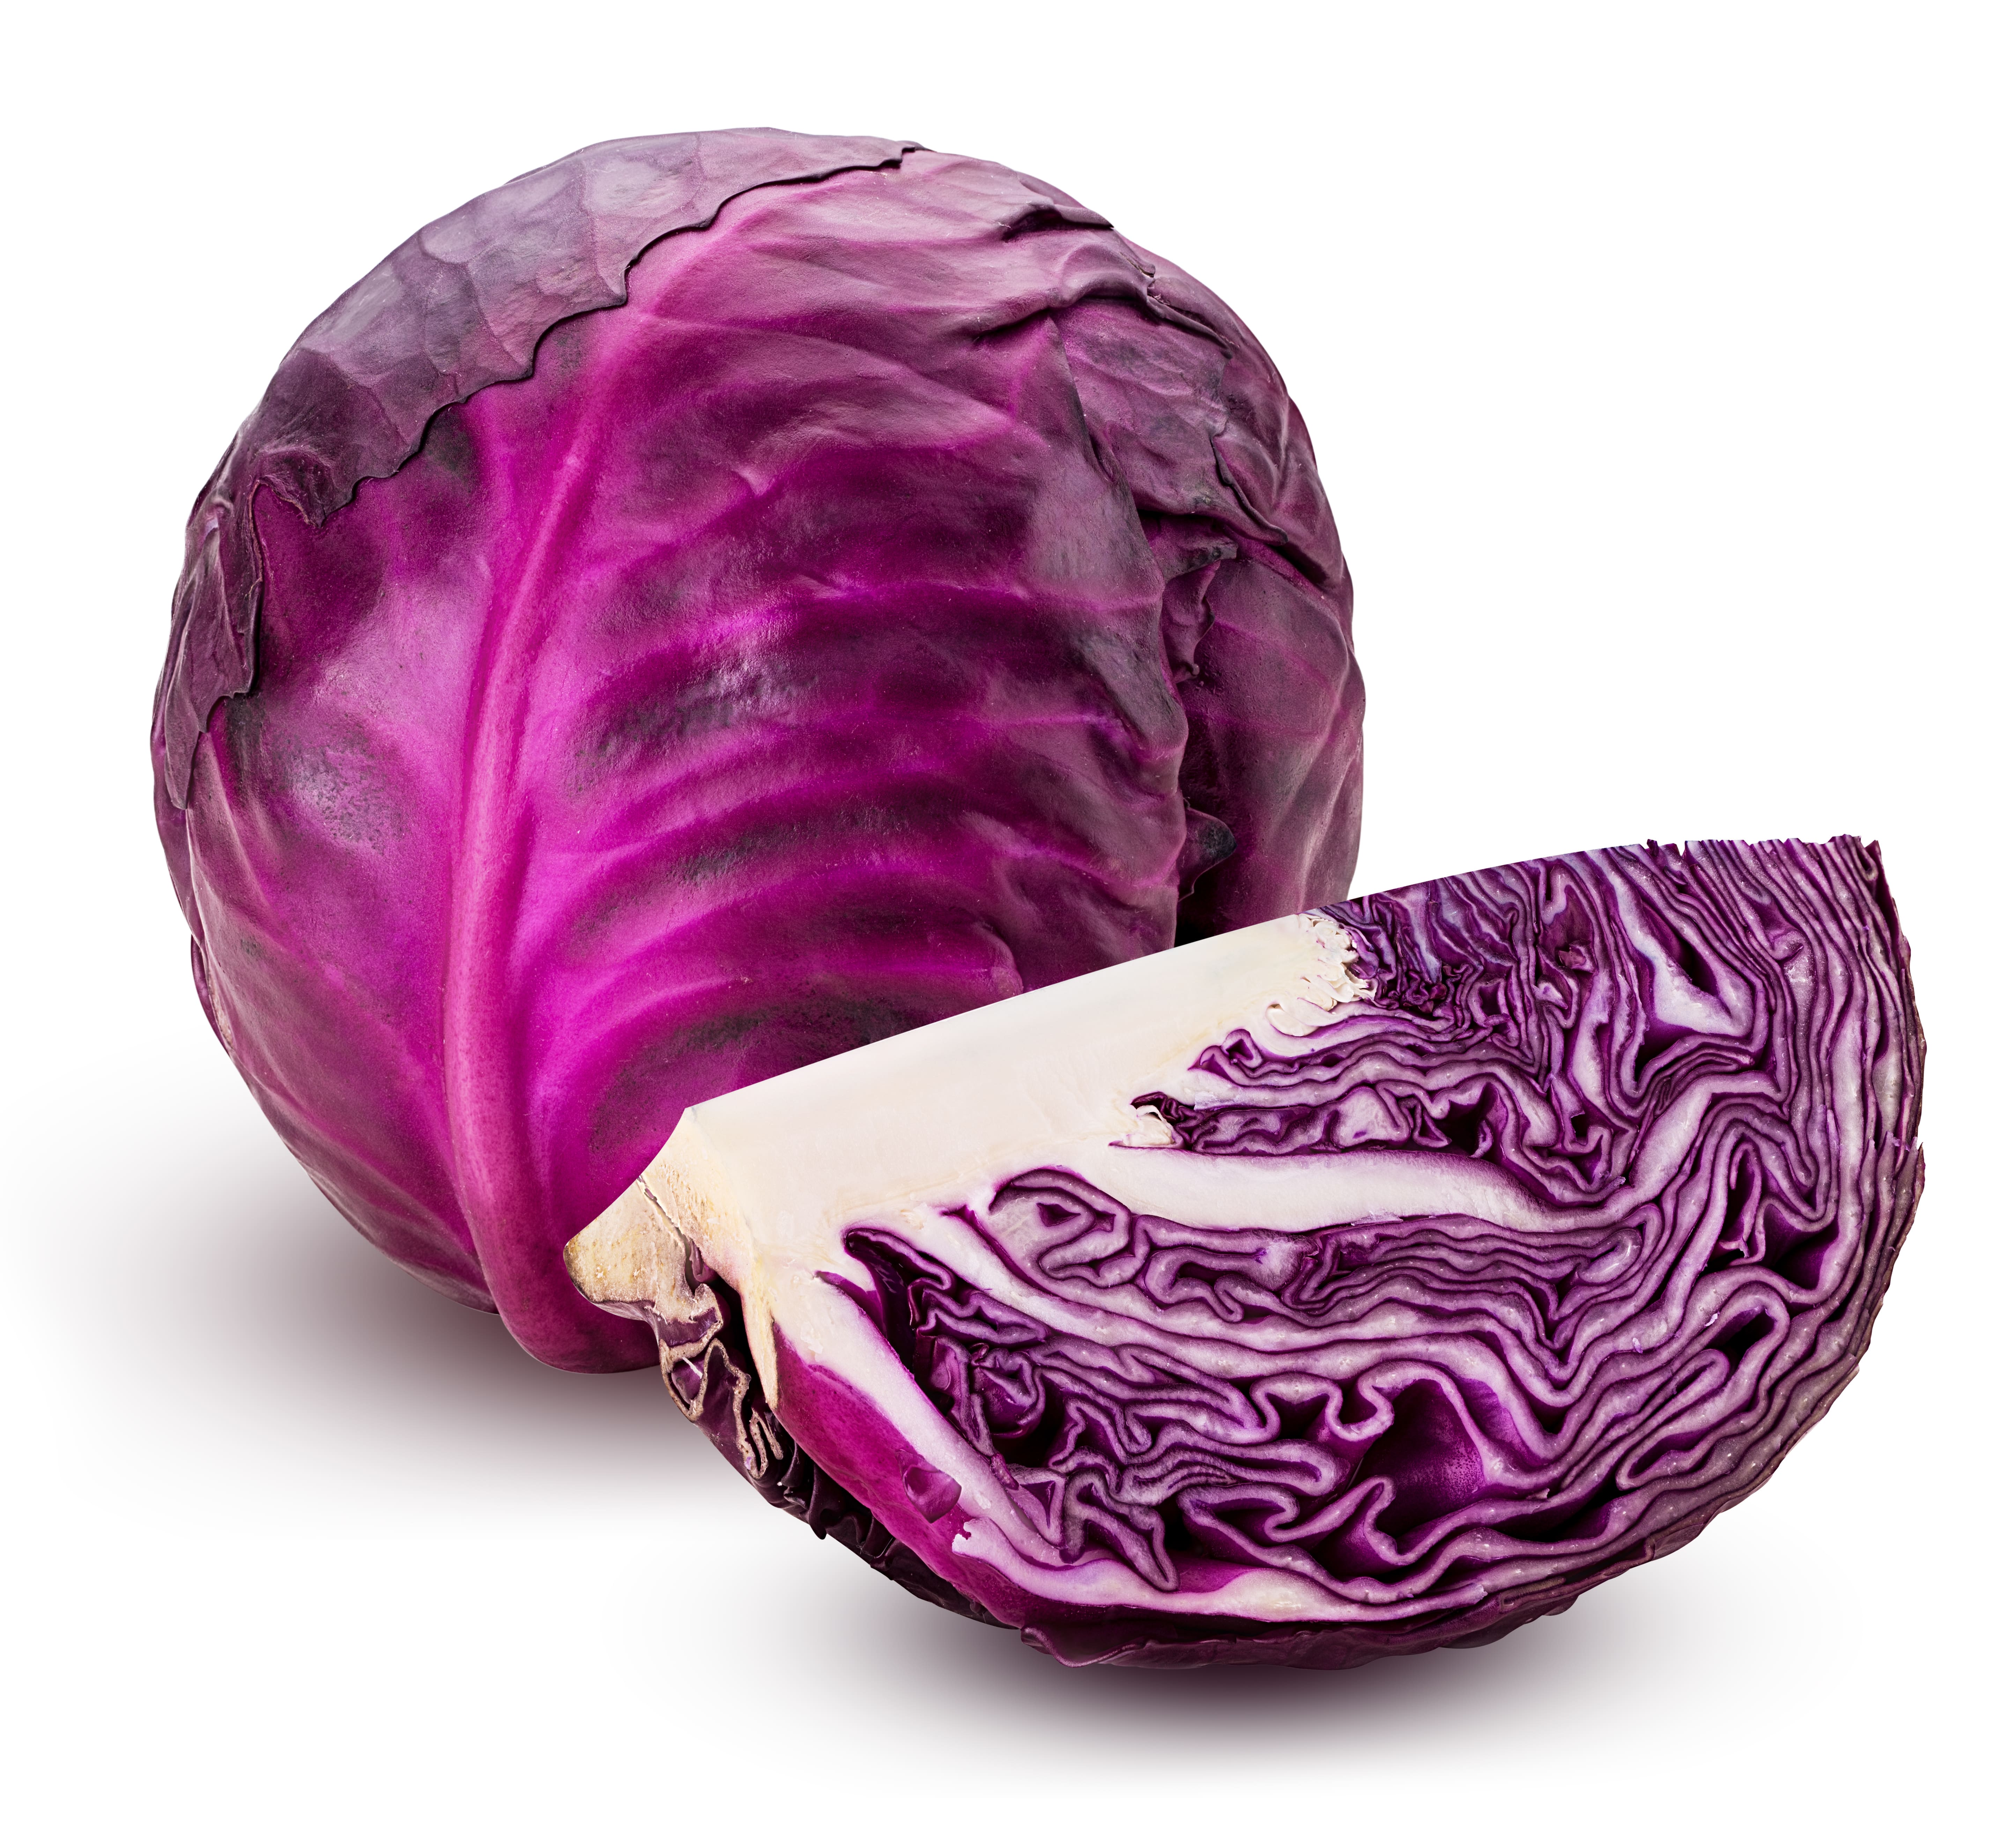 Red Cabbage Images | Hot Sex Picture